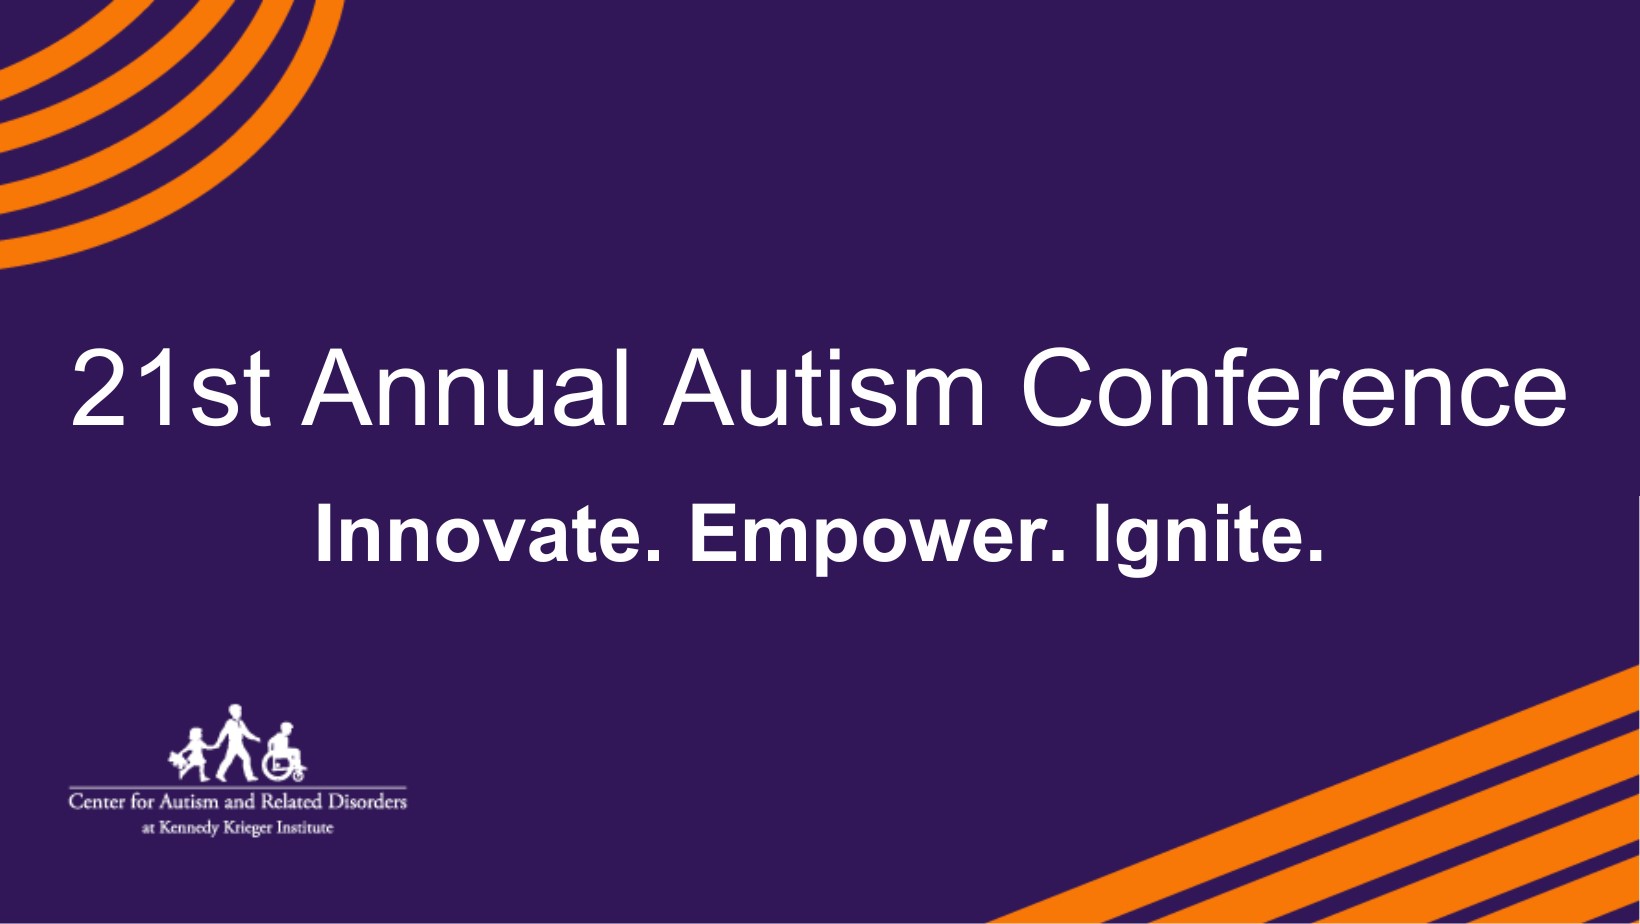 21st Annual Autism Conference. Innovate. Empower Ignite. The message appears in white font against a purple backdrop, with orange semi-circular lines in the upper-left and lower-right hand corners.  The Center for Autism and Related Disorders at Kennedy Krieger Institute logo is in the lower left-hand corner.